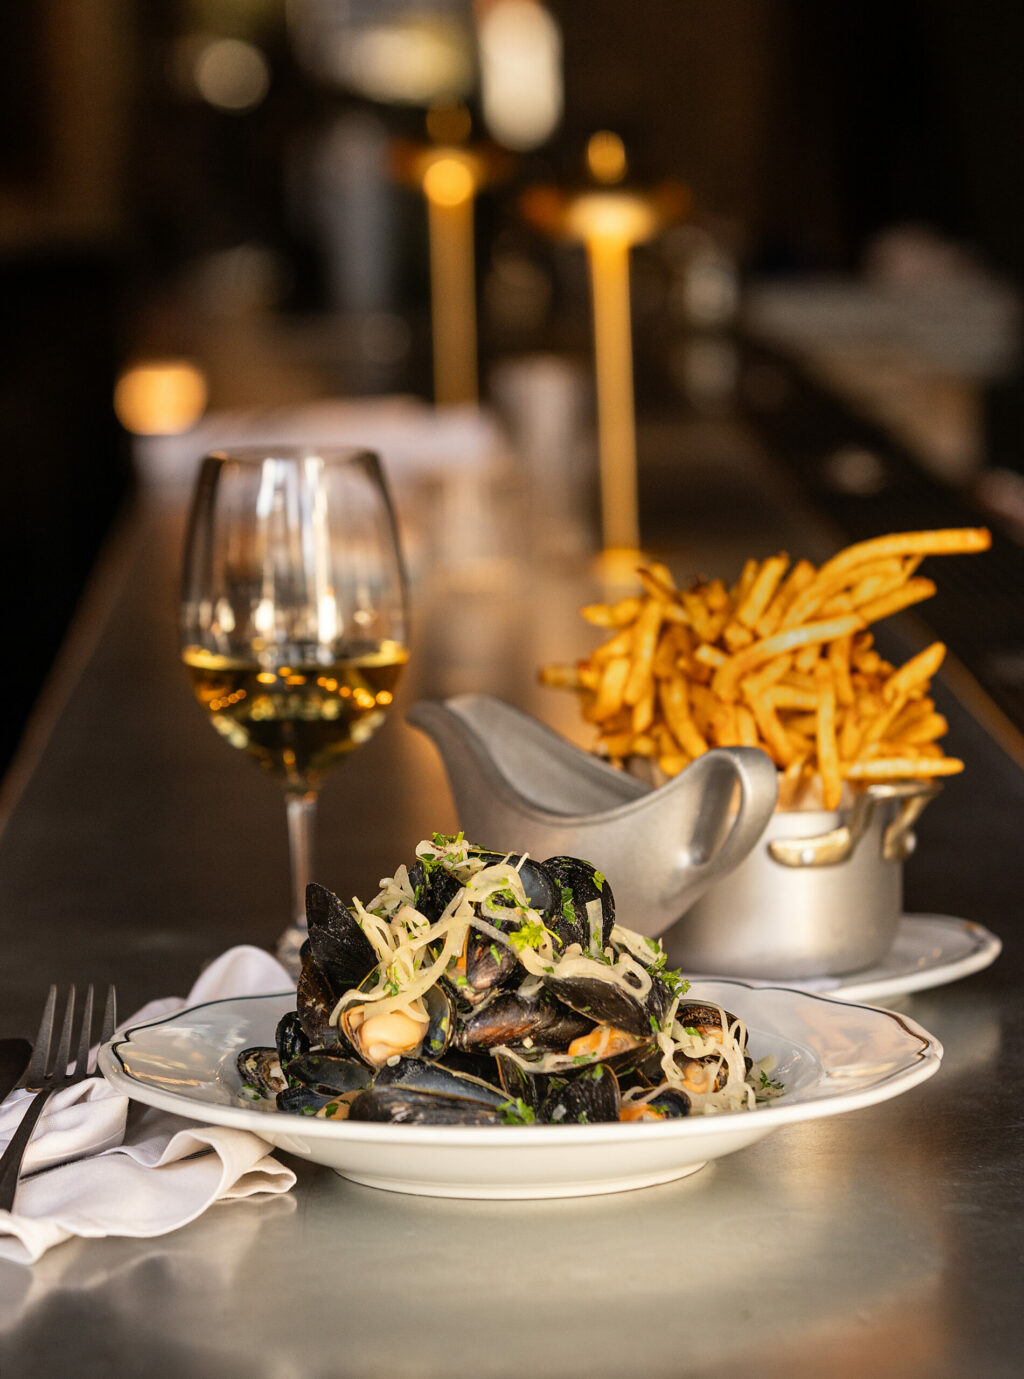 Mussels & Frites with cider, shallots, and Dijon créme fraîche from Augie’s French Tuesday, November 28, 2023 on Courthouse Square in Santa Rosa. (Photo John Burgess/The Press Democrat)